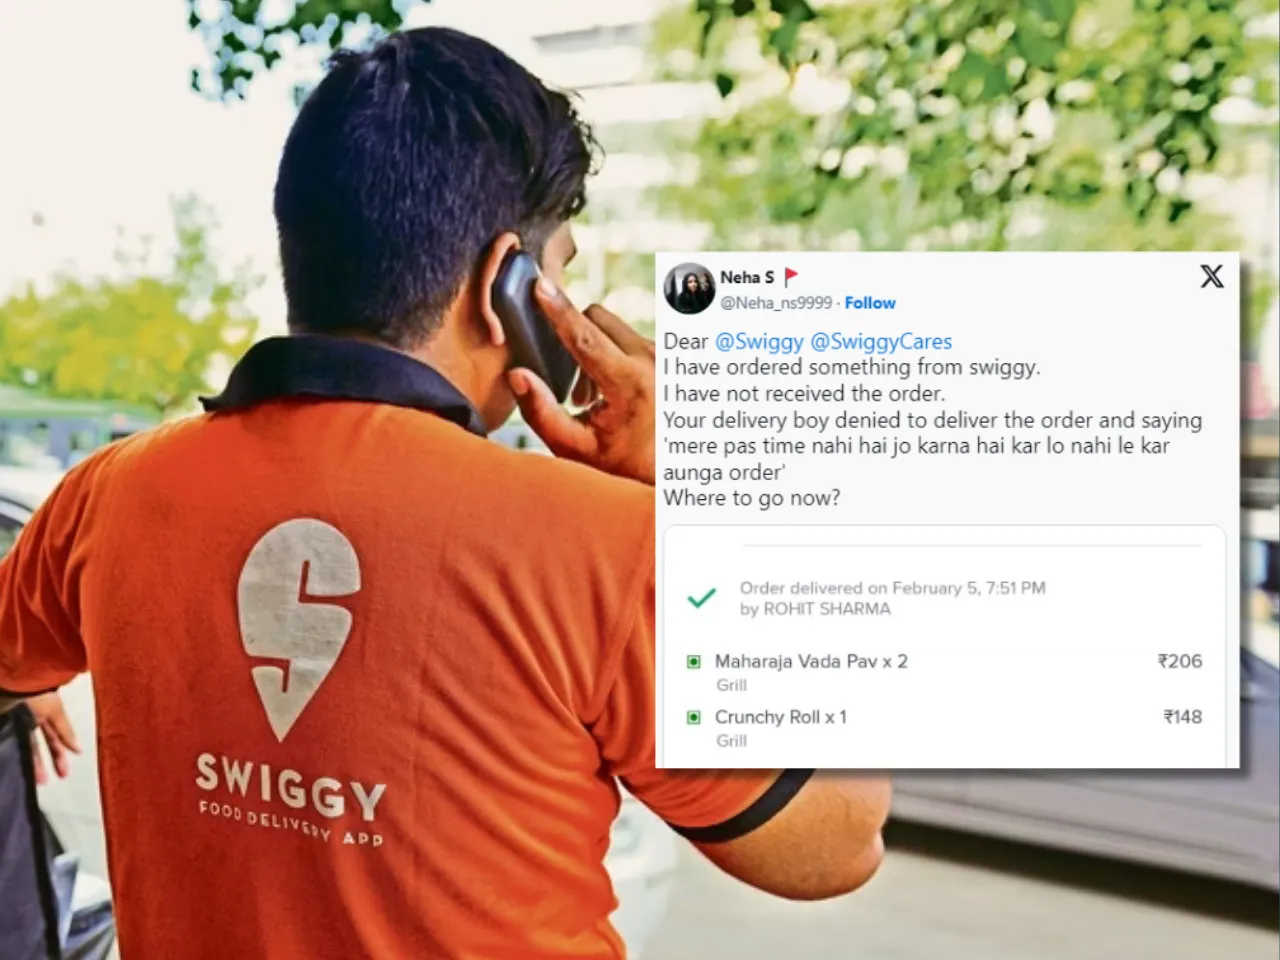 Swiggy delivery boy denies food delivery to woman